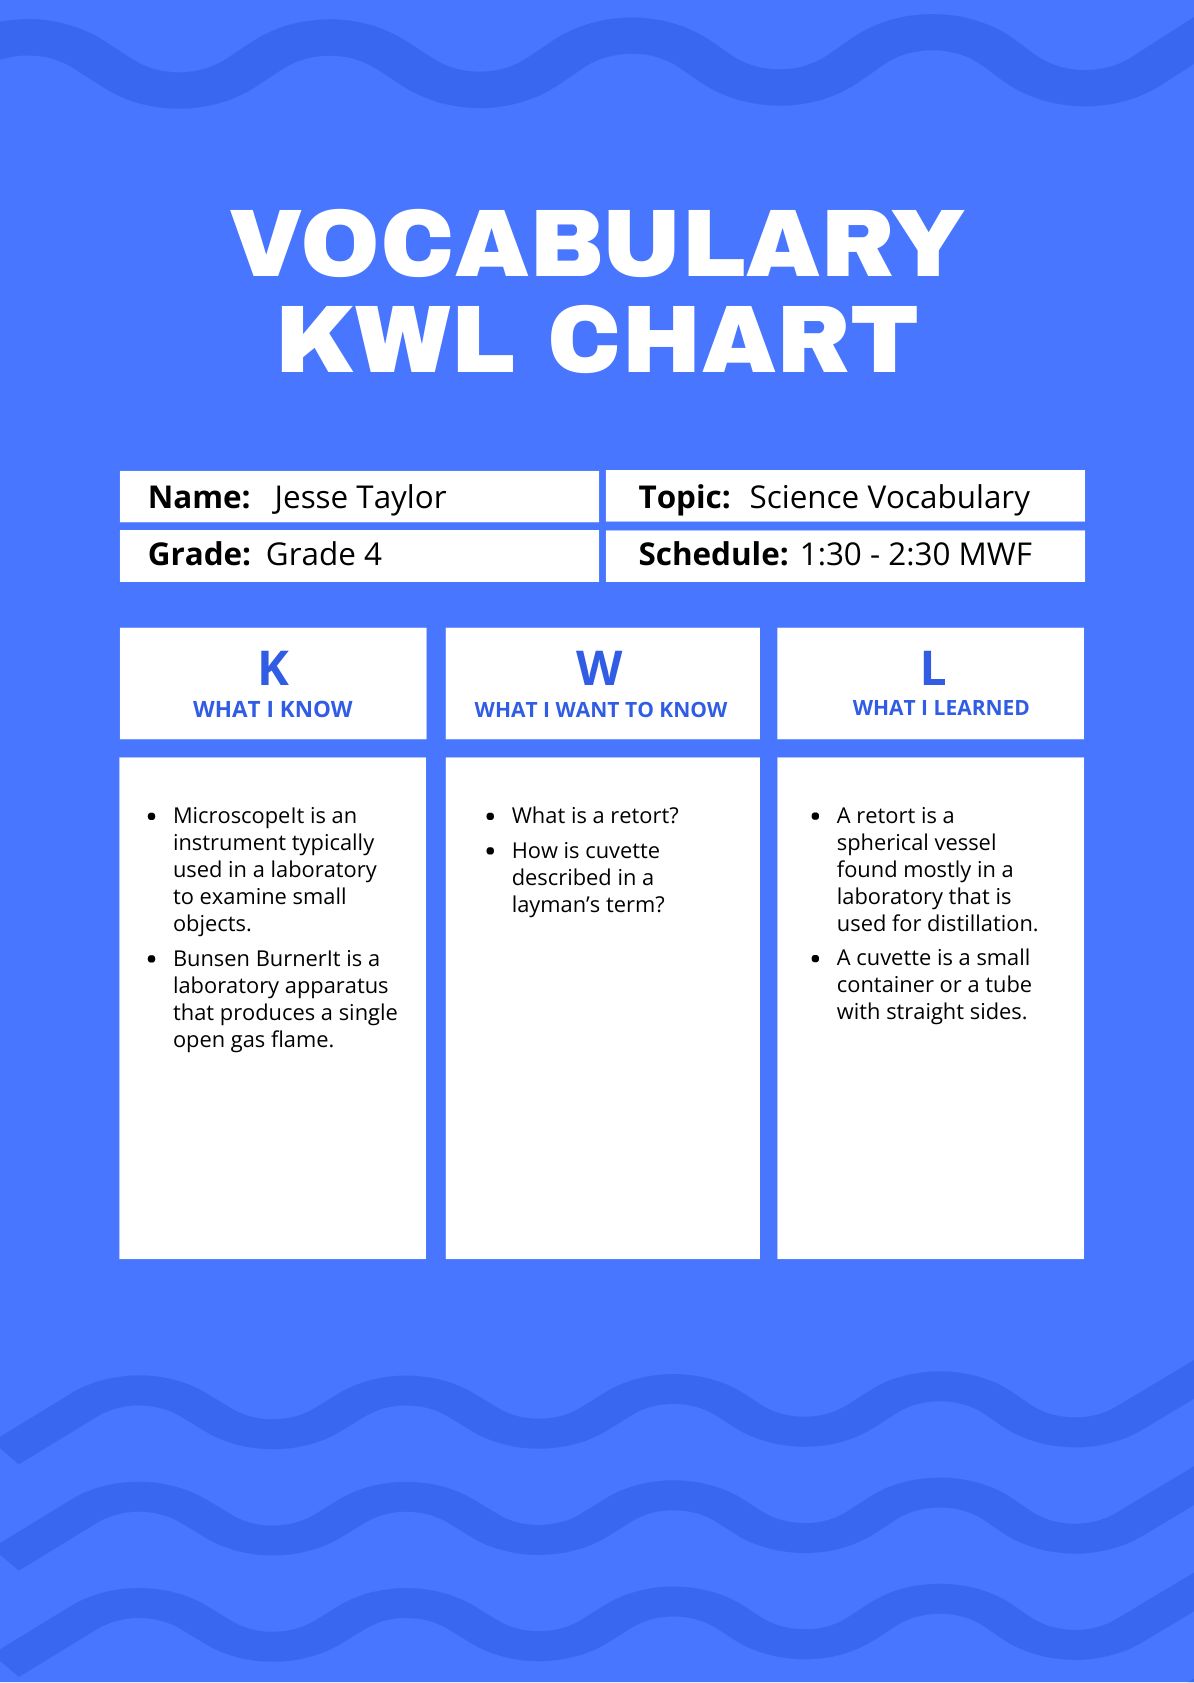 Free Vocabulary KWL Chart Download in PDF